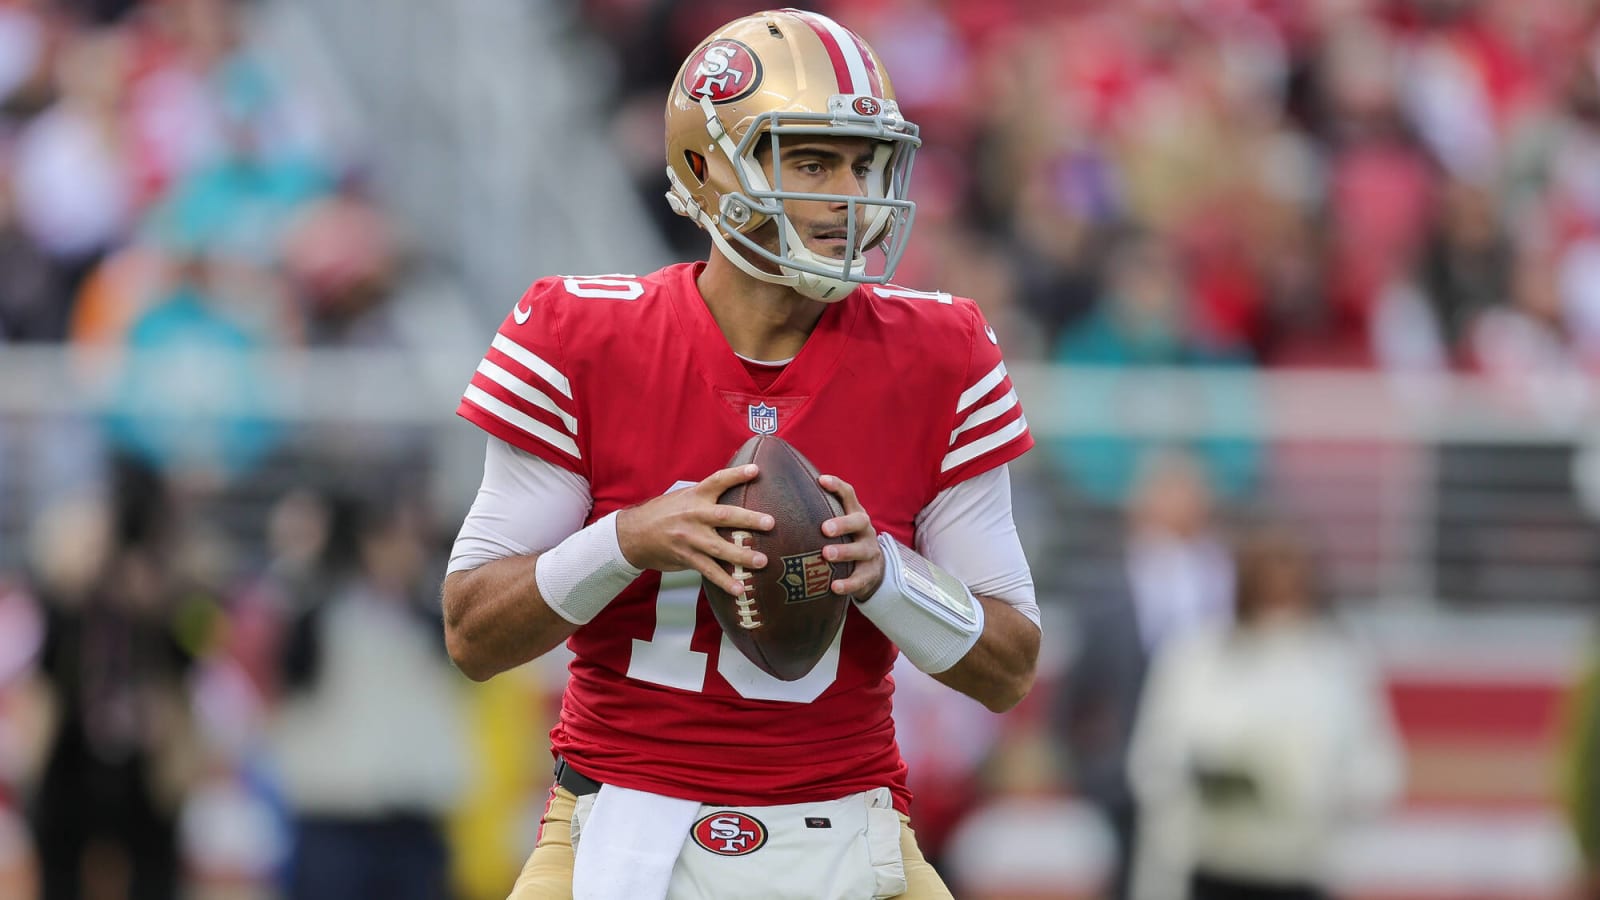 Two surprising suitors emerge for QB Jimmy Garoppolo